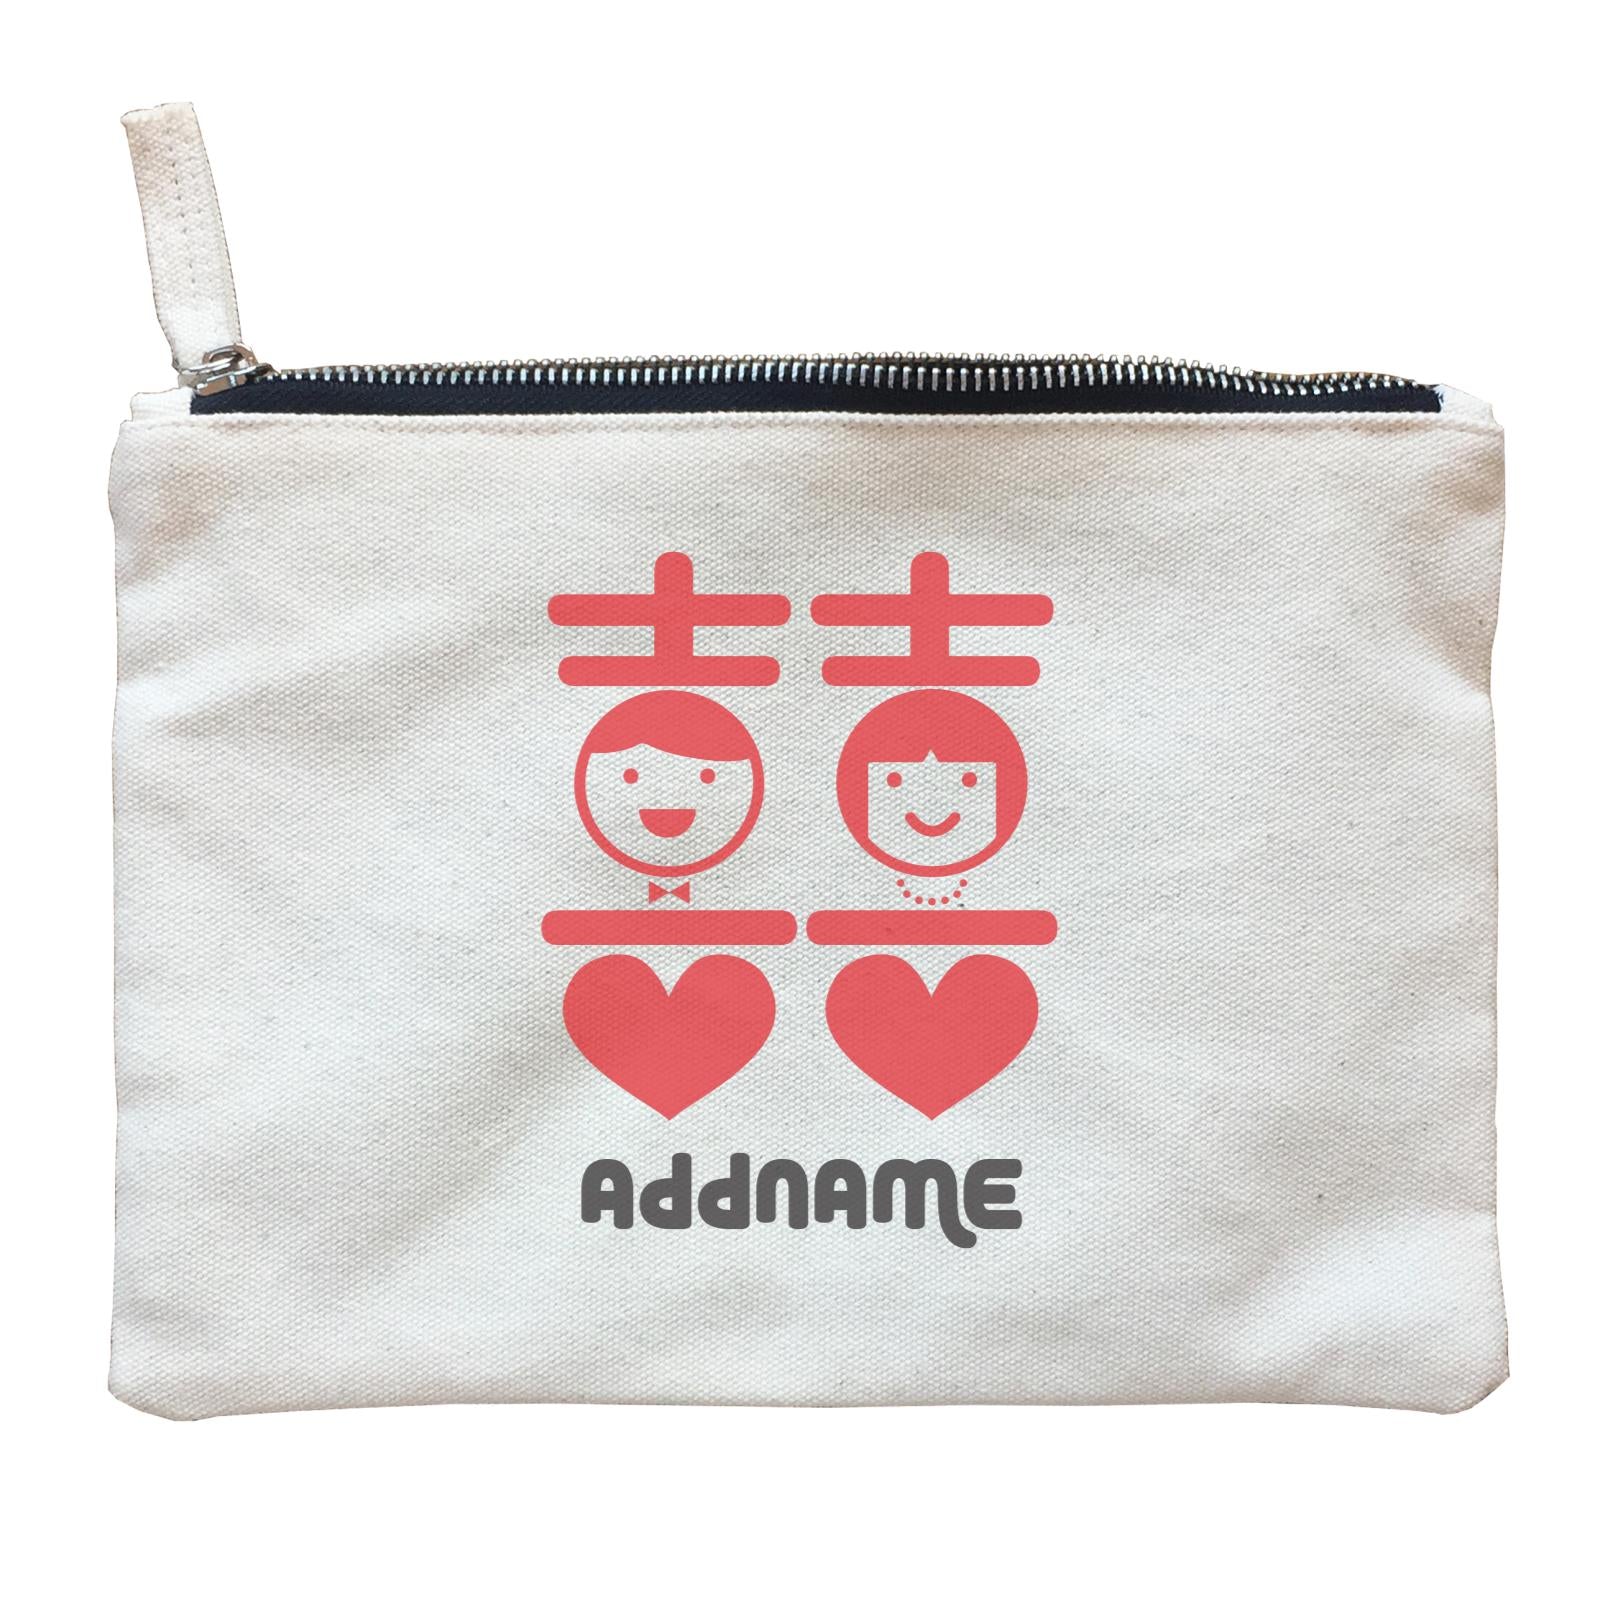 Double Happiness Wedding Couples Addname Zipper Pouch